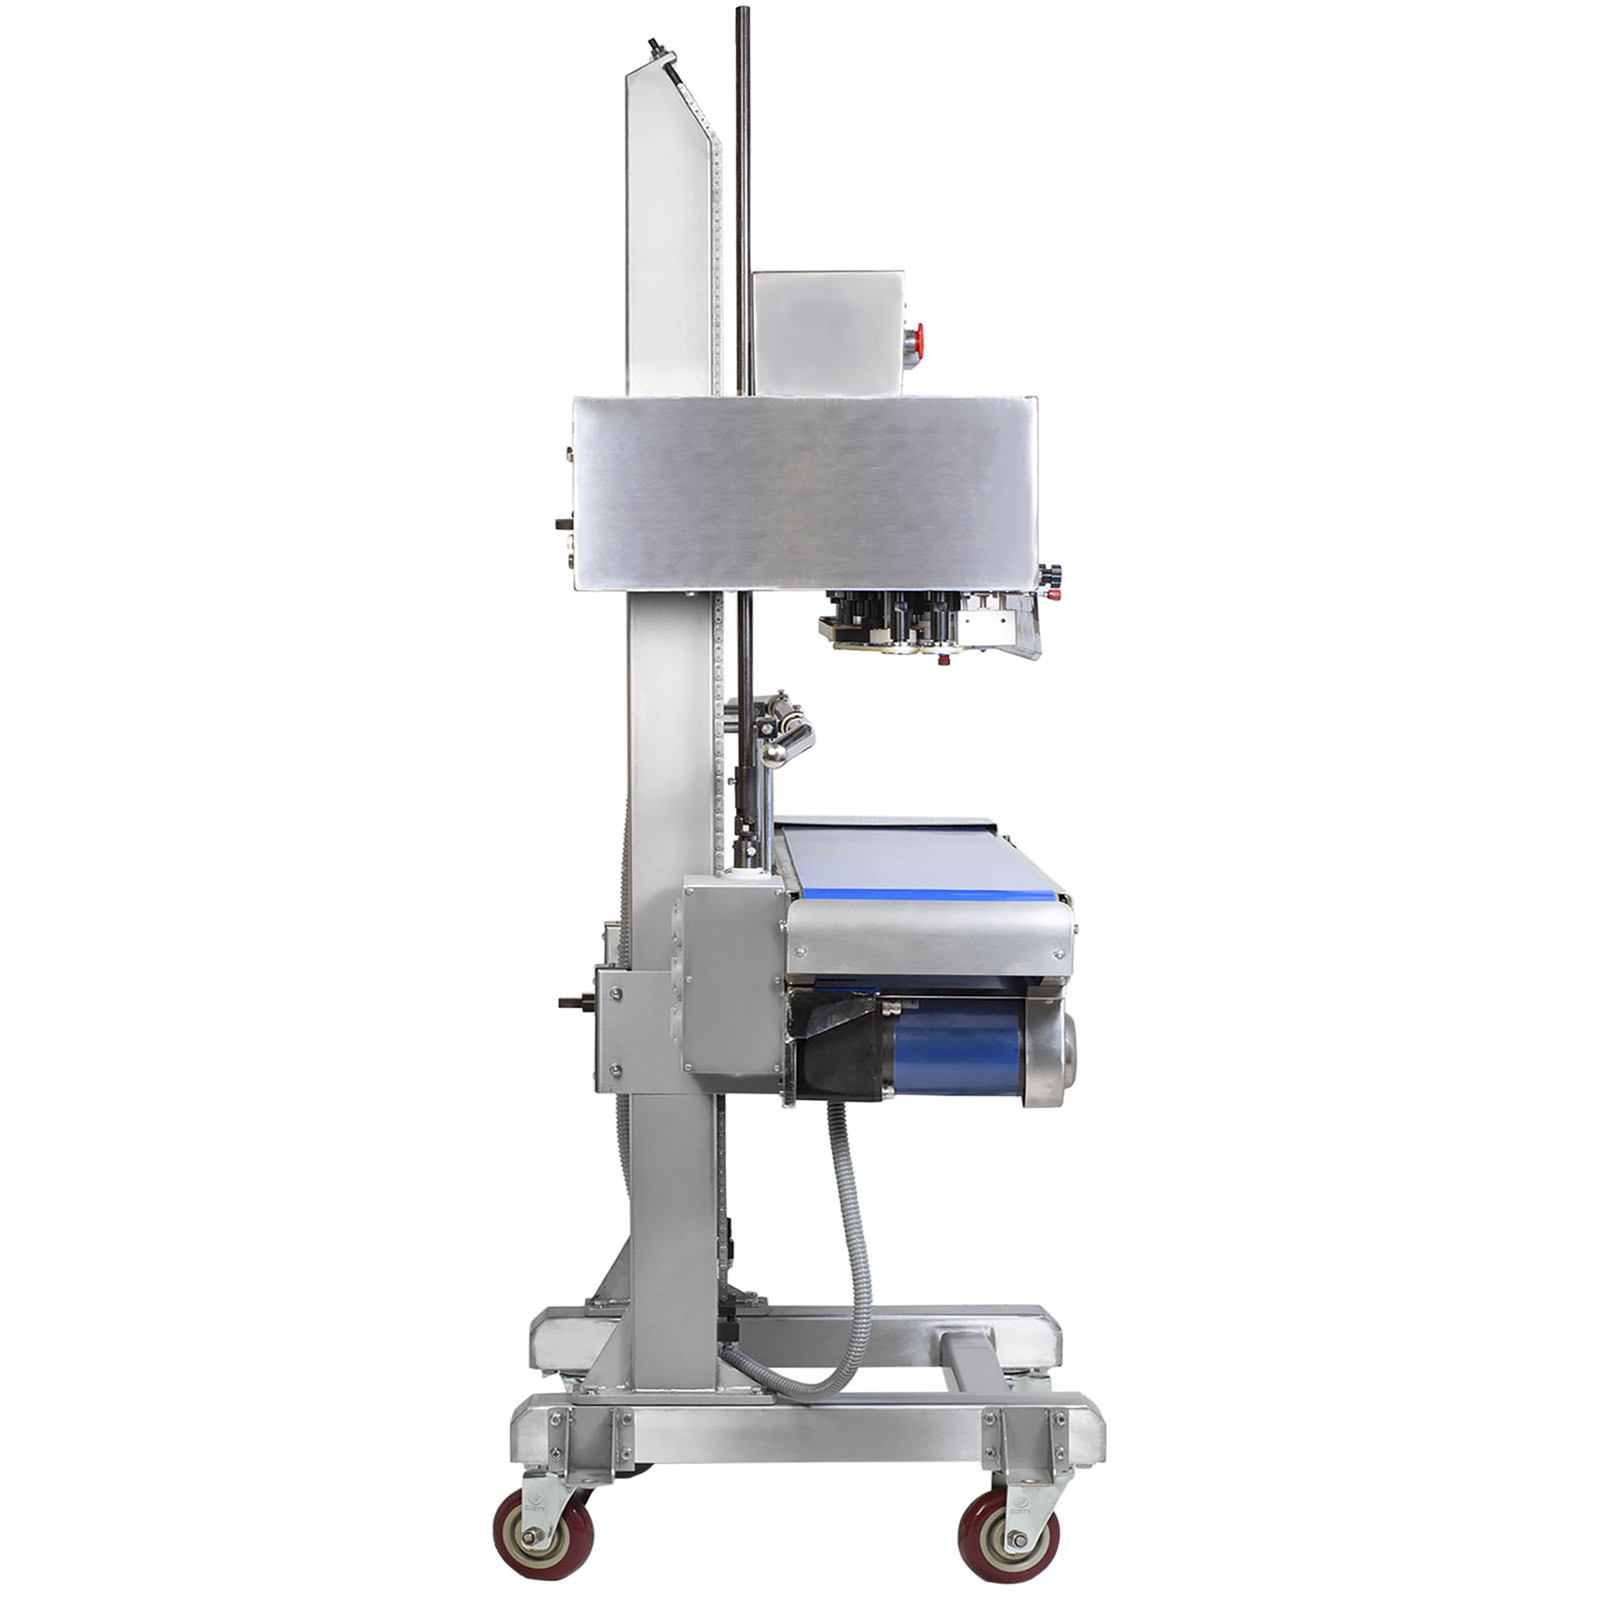 Side view of the  JORESTECH stainless steel continuous band sealer with green revolving band and heavy duty wheels over white background. Also show the side where the bag is coded and the end of the sealing process